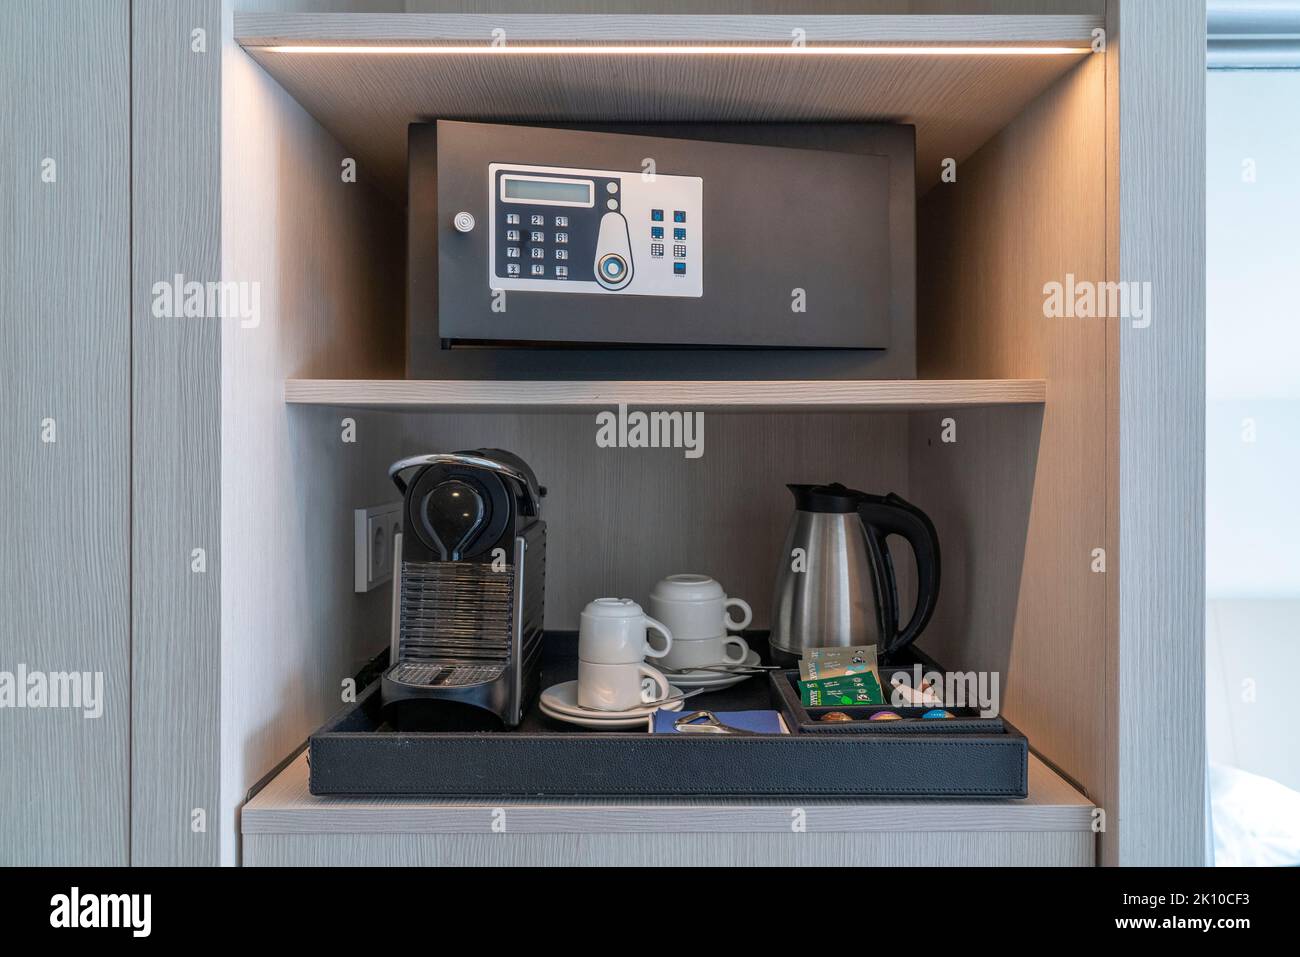 https://c8.alamy.com/comp/2K10CF3/hotel-safe-in-a-hotel-room-coffee-machine-glasses-cups-as-a-service-for-the-guest-2K10CF3.jpg